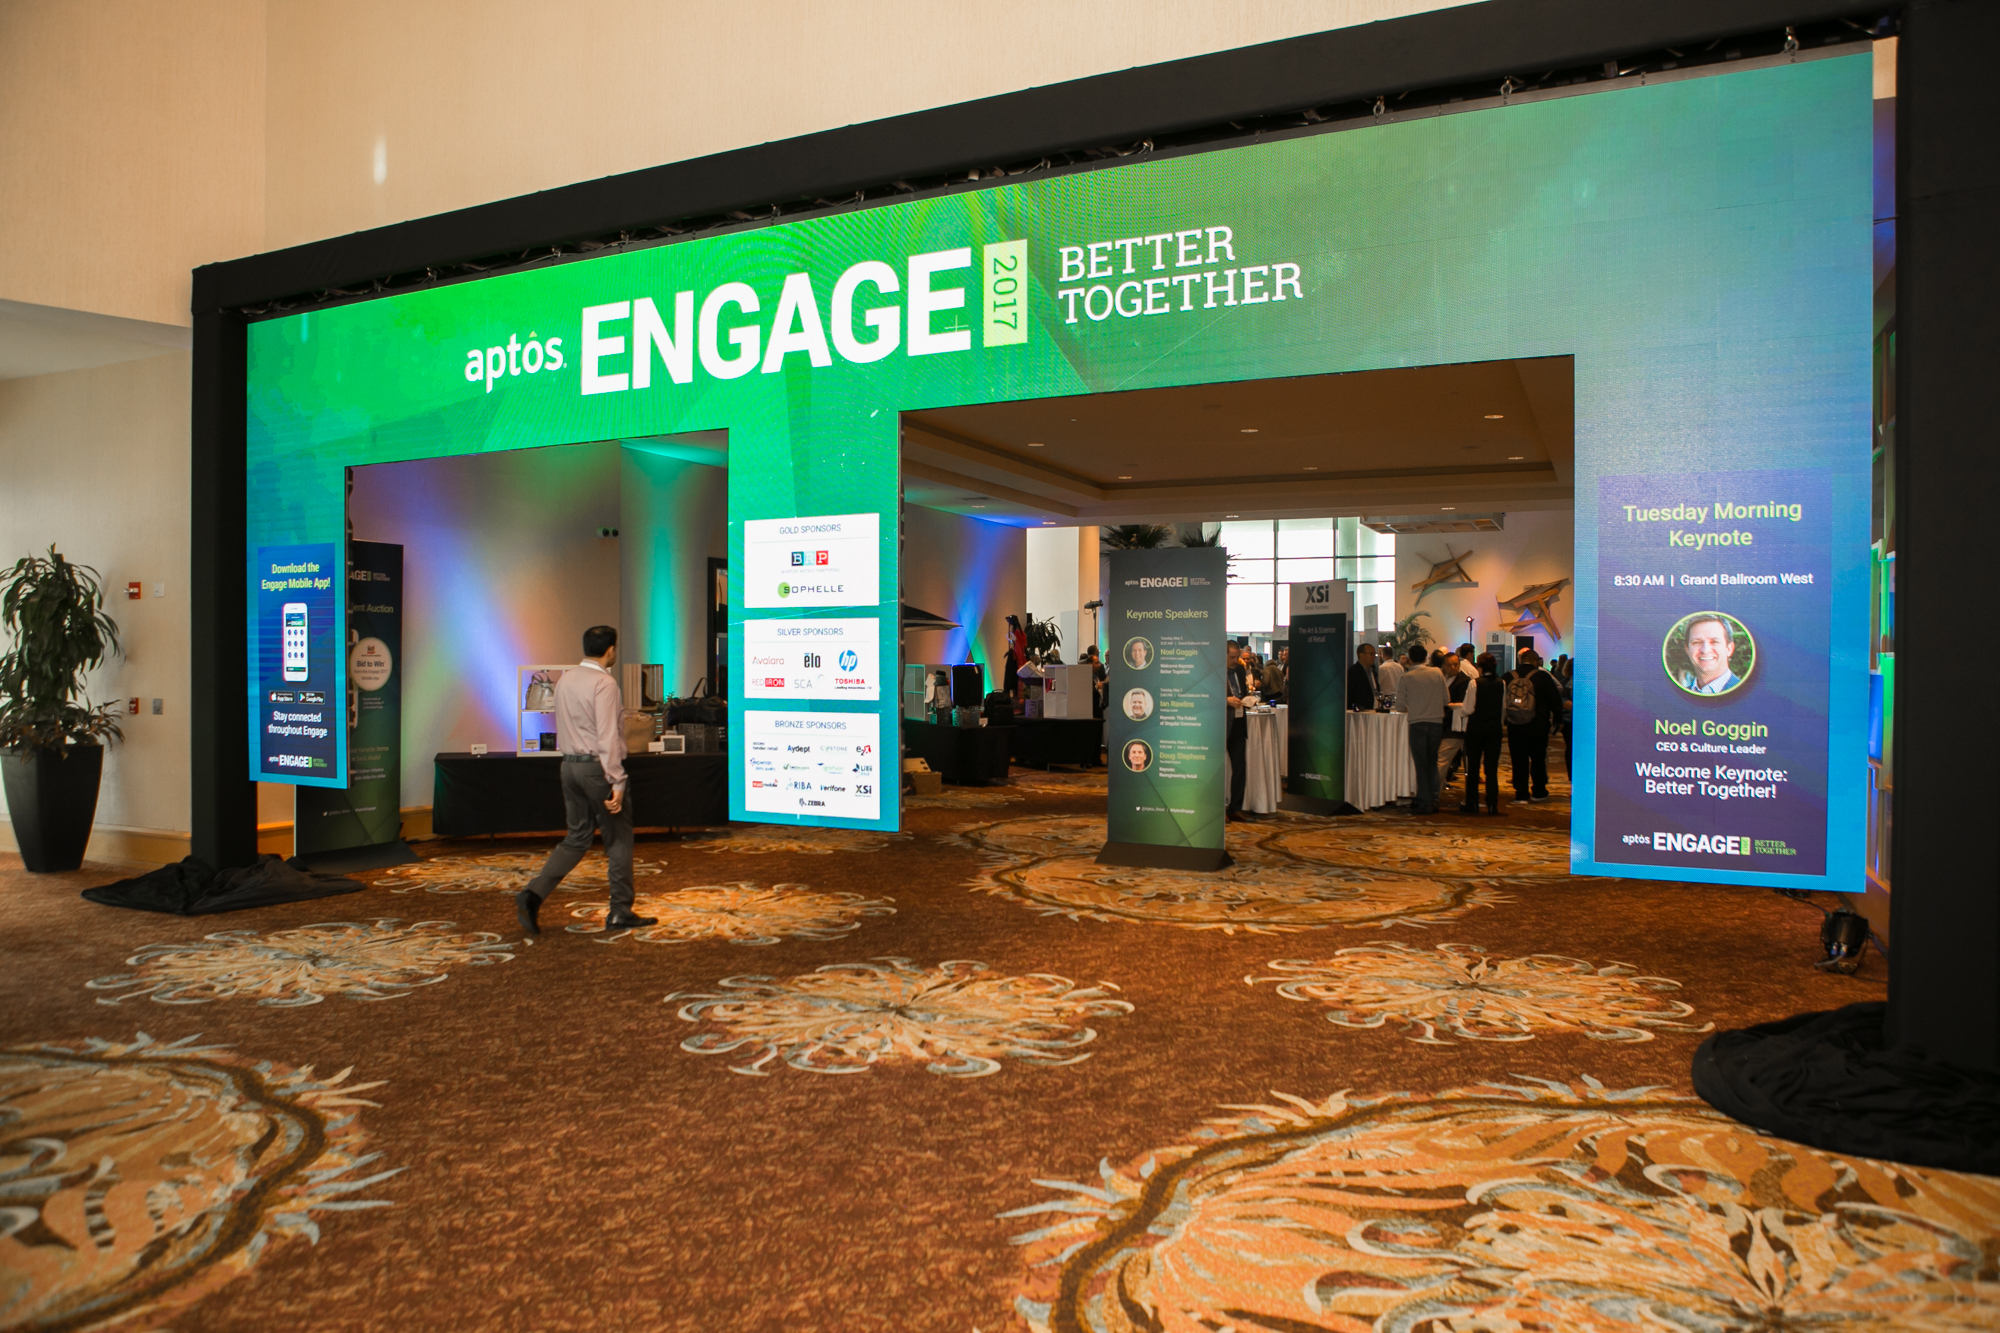 An LED arch at the Aptos Engage 2017 conference in Hollywood, California. Try-Marq uses LED features like the arch to add a 'wow' factor to our clients' events.